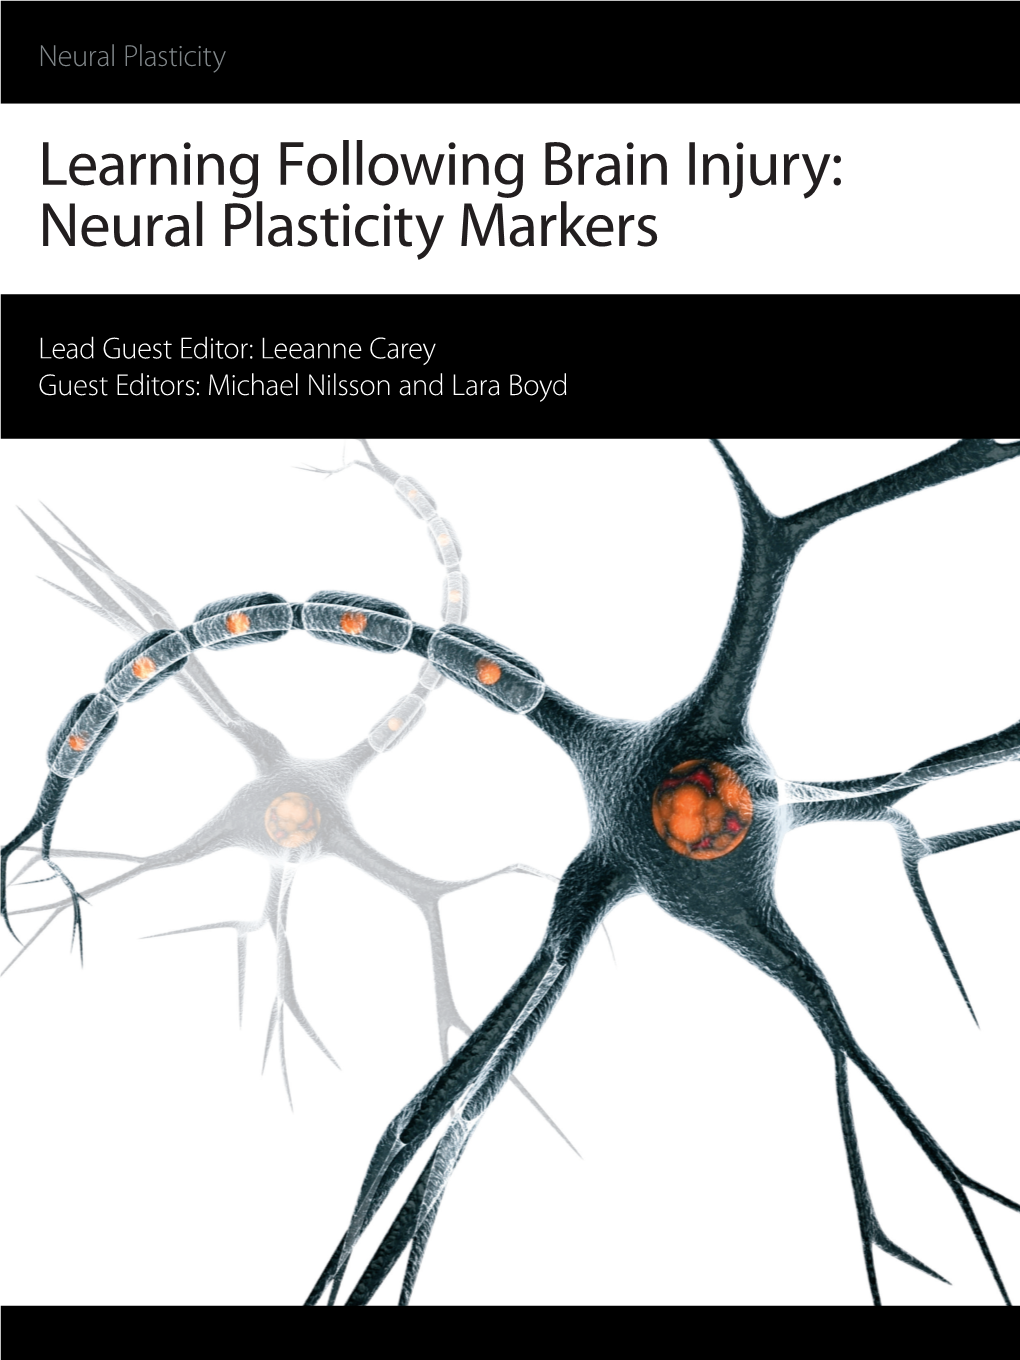 Learning Following Brain Injury: Neural Plasticity Markers